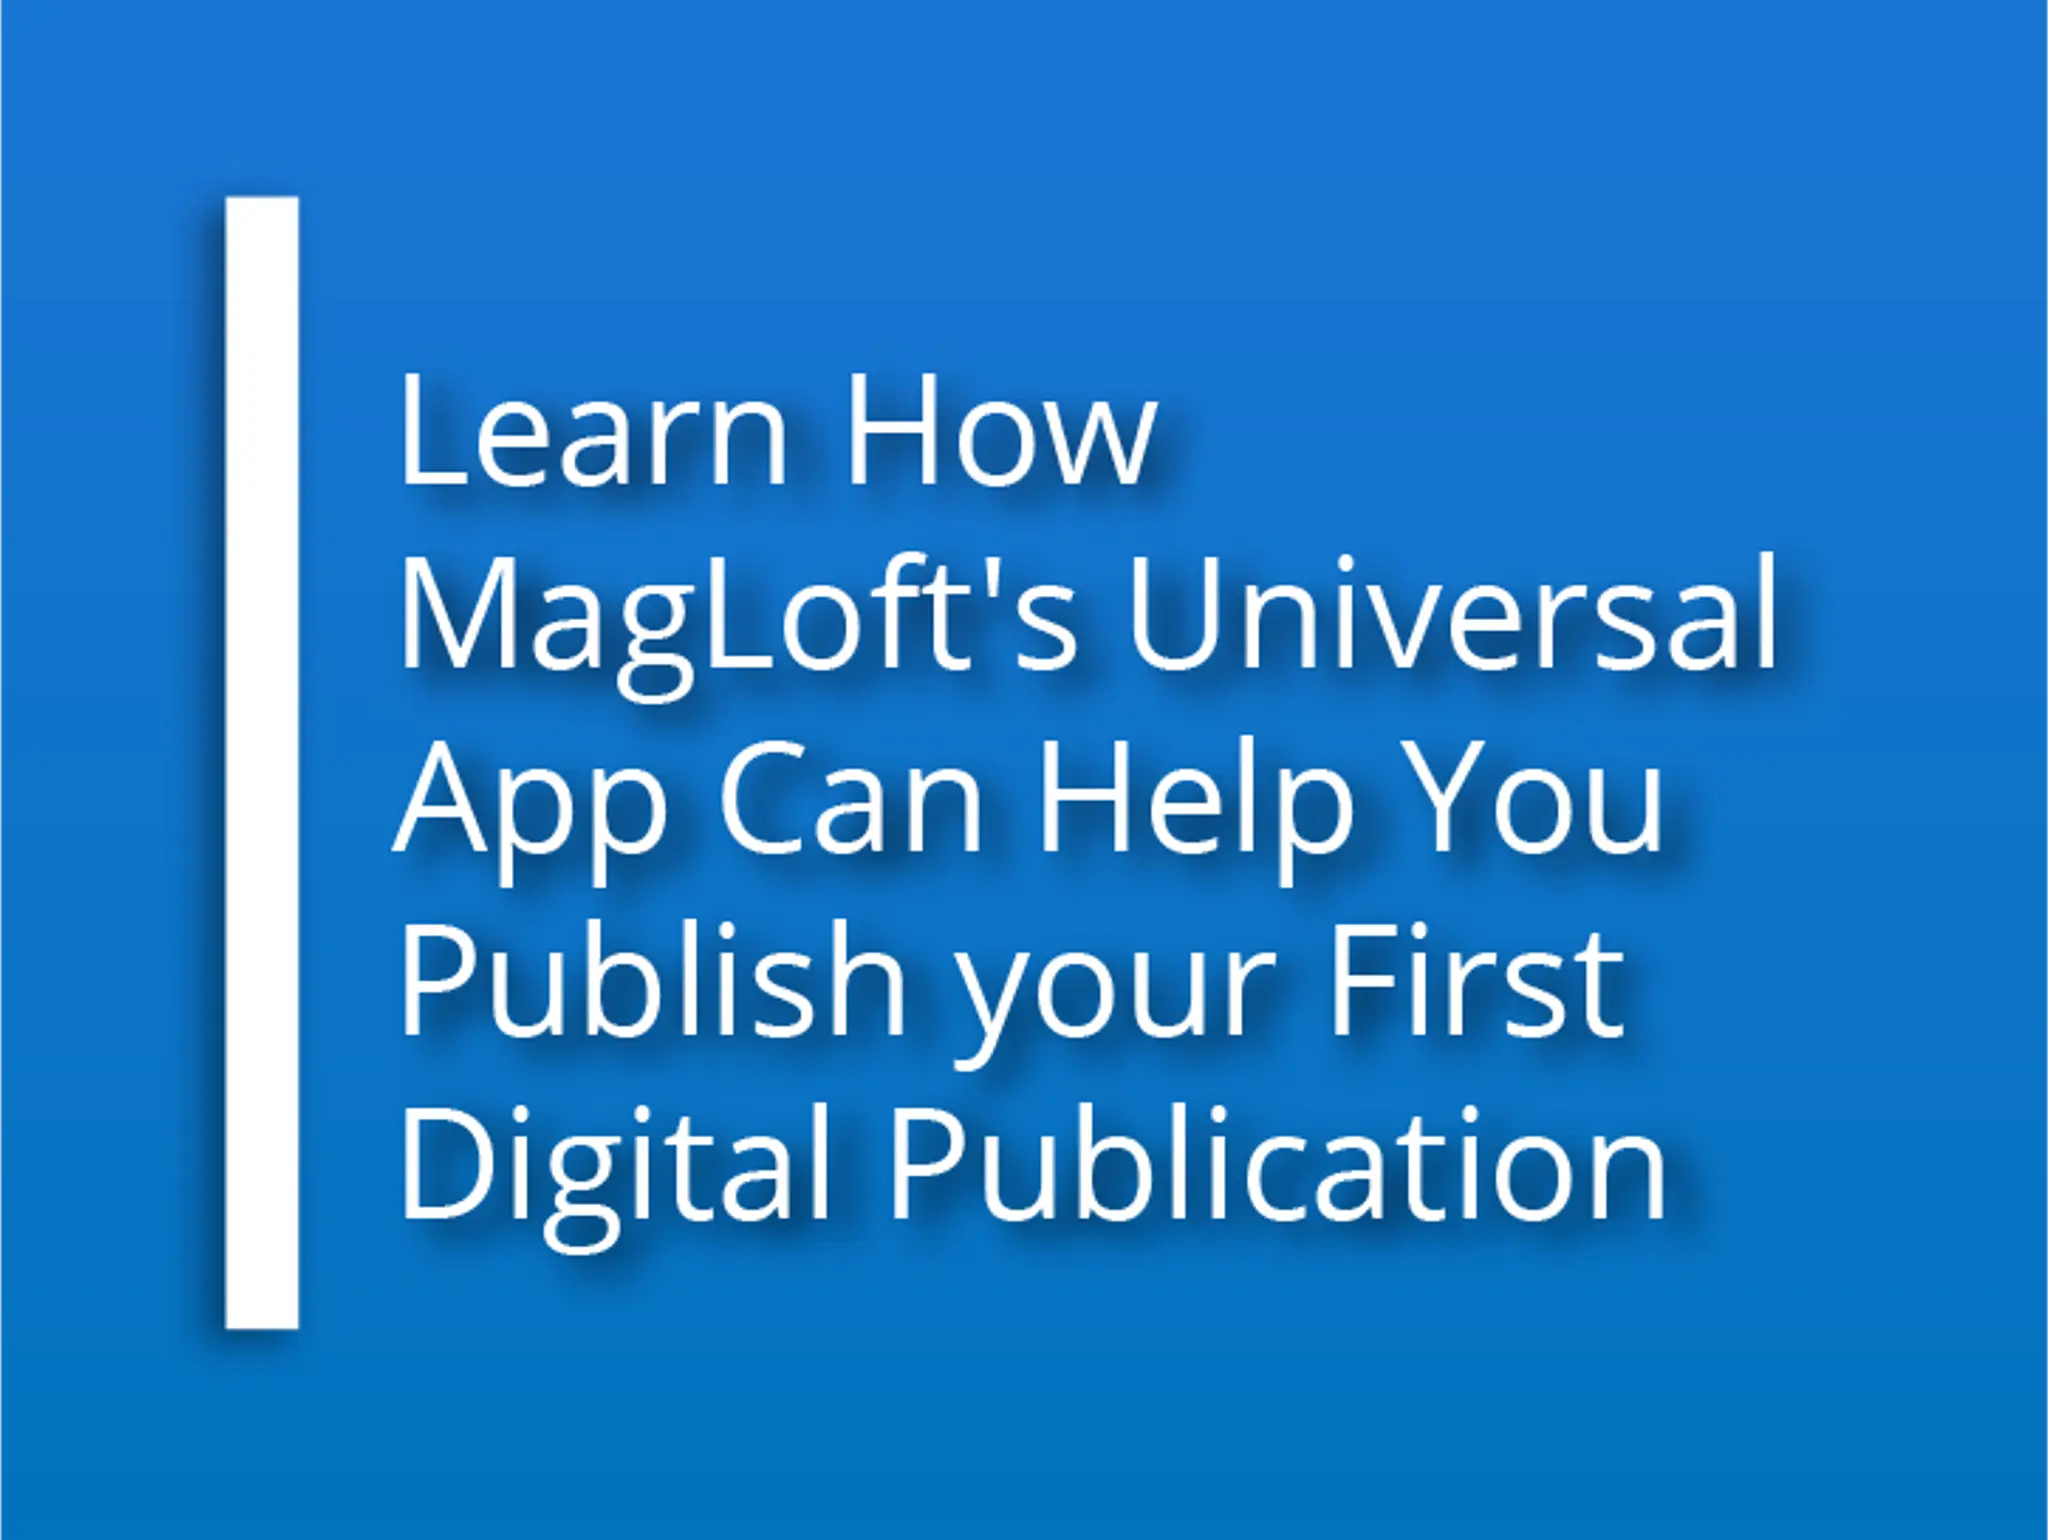 Learn How MagLoft's Universal App Can Help You Publish your First Digital Publication